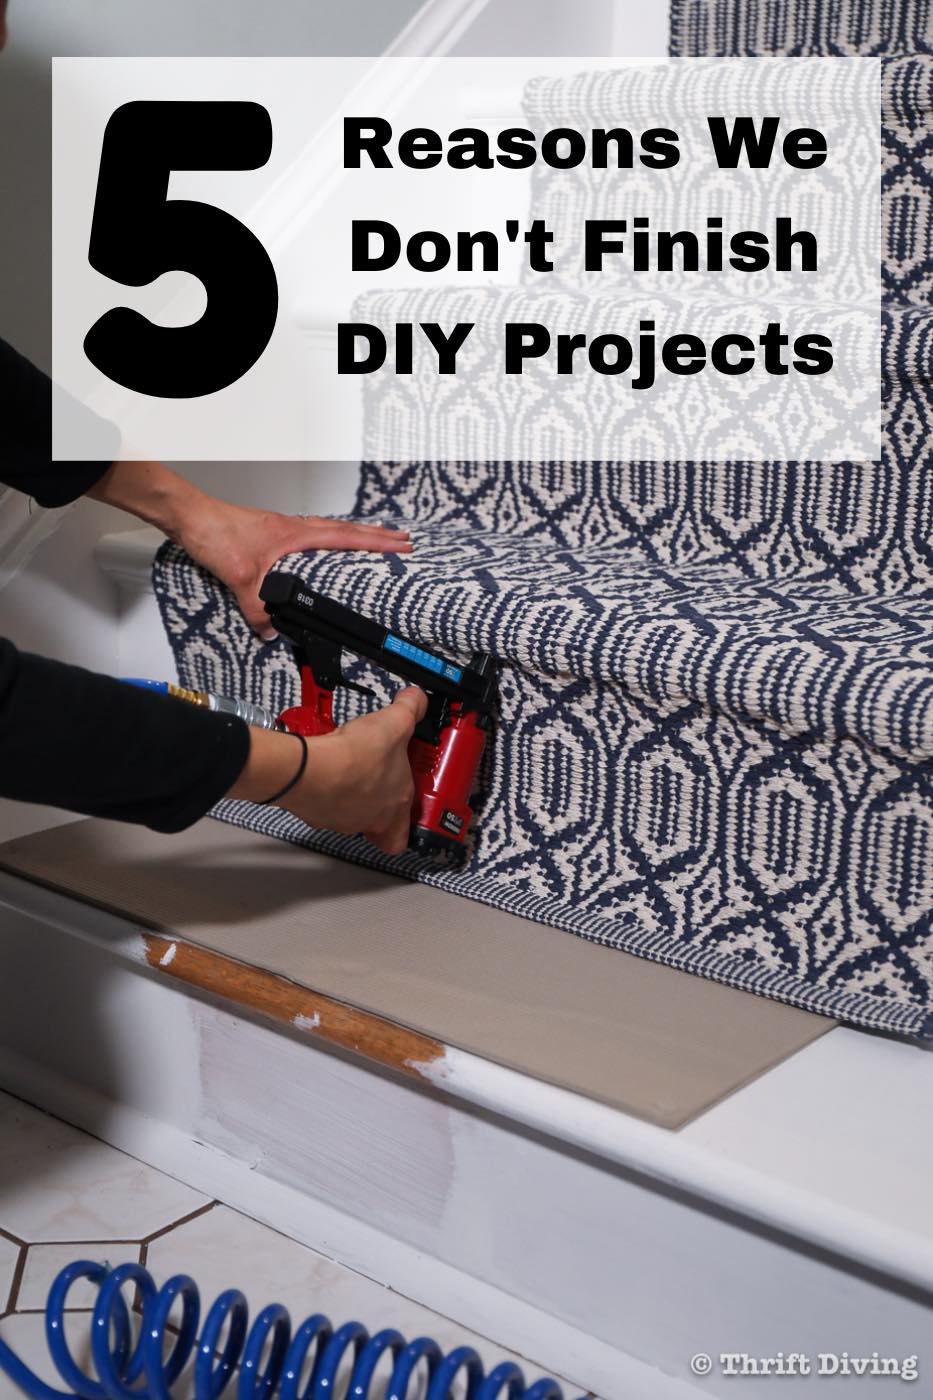 5 Reasons We Don’t Finish DIY Projects (and How to Finish!)